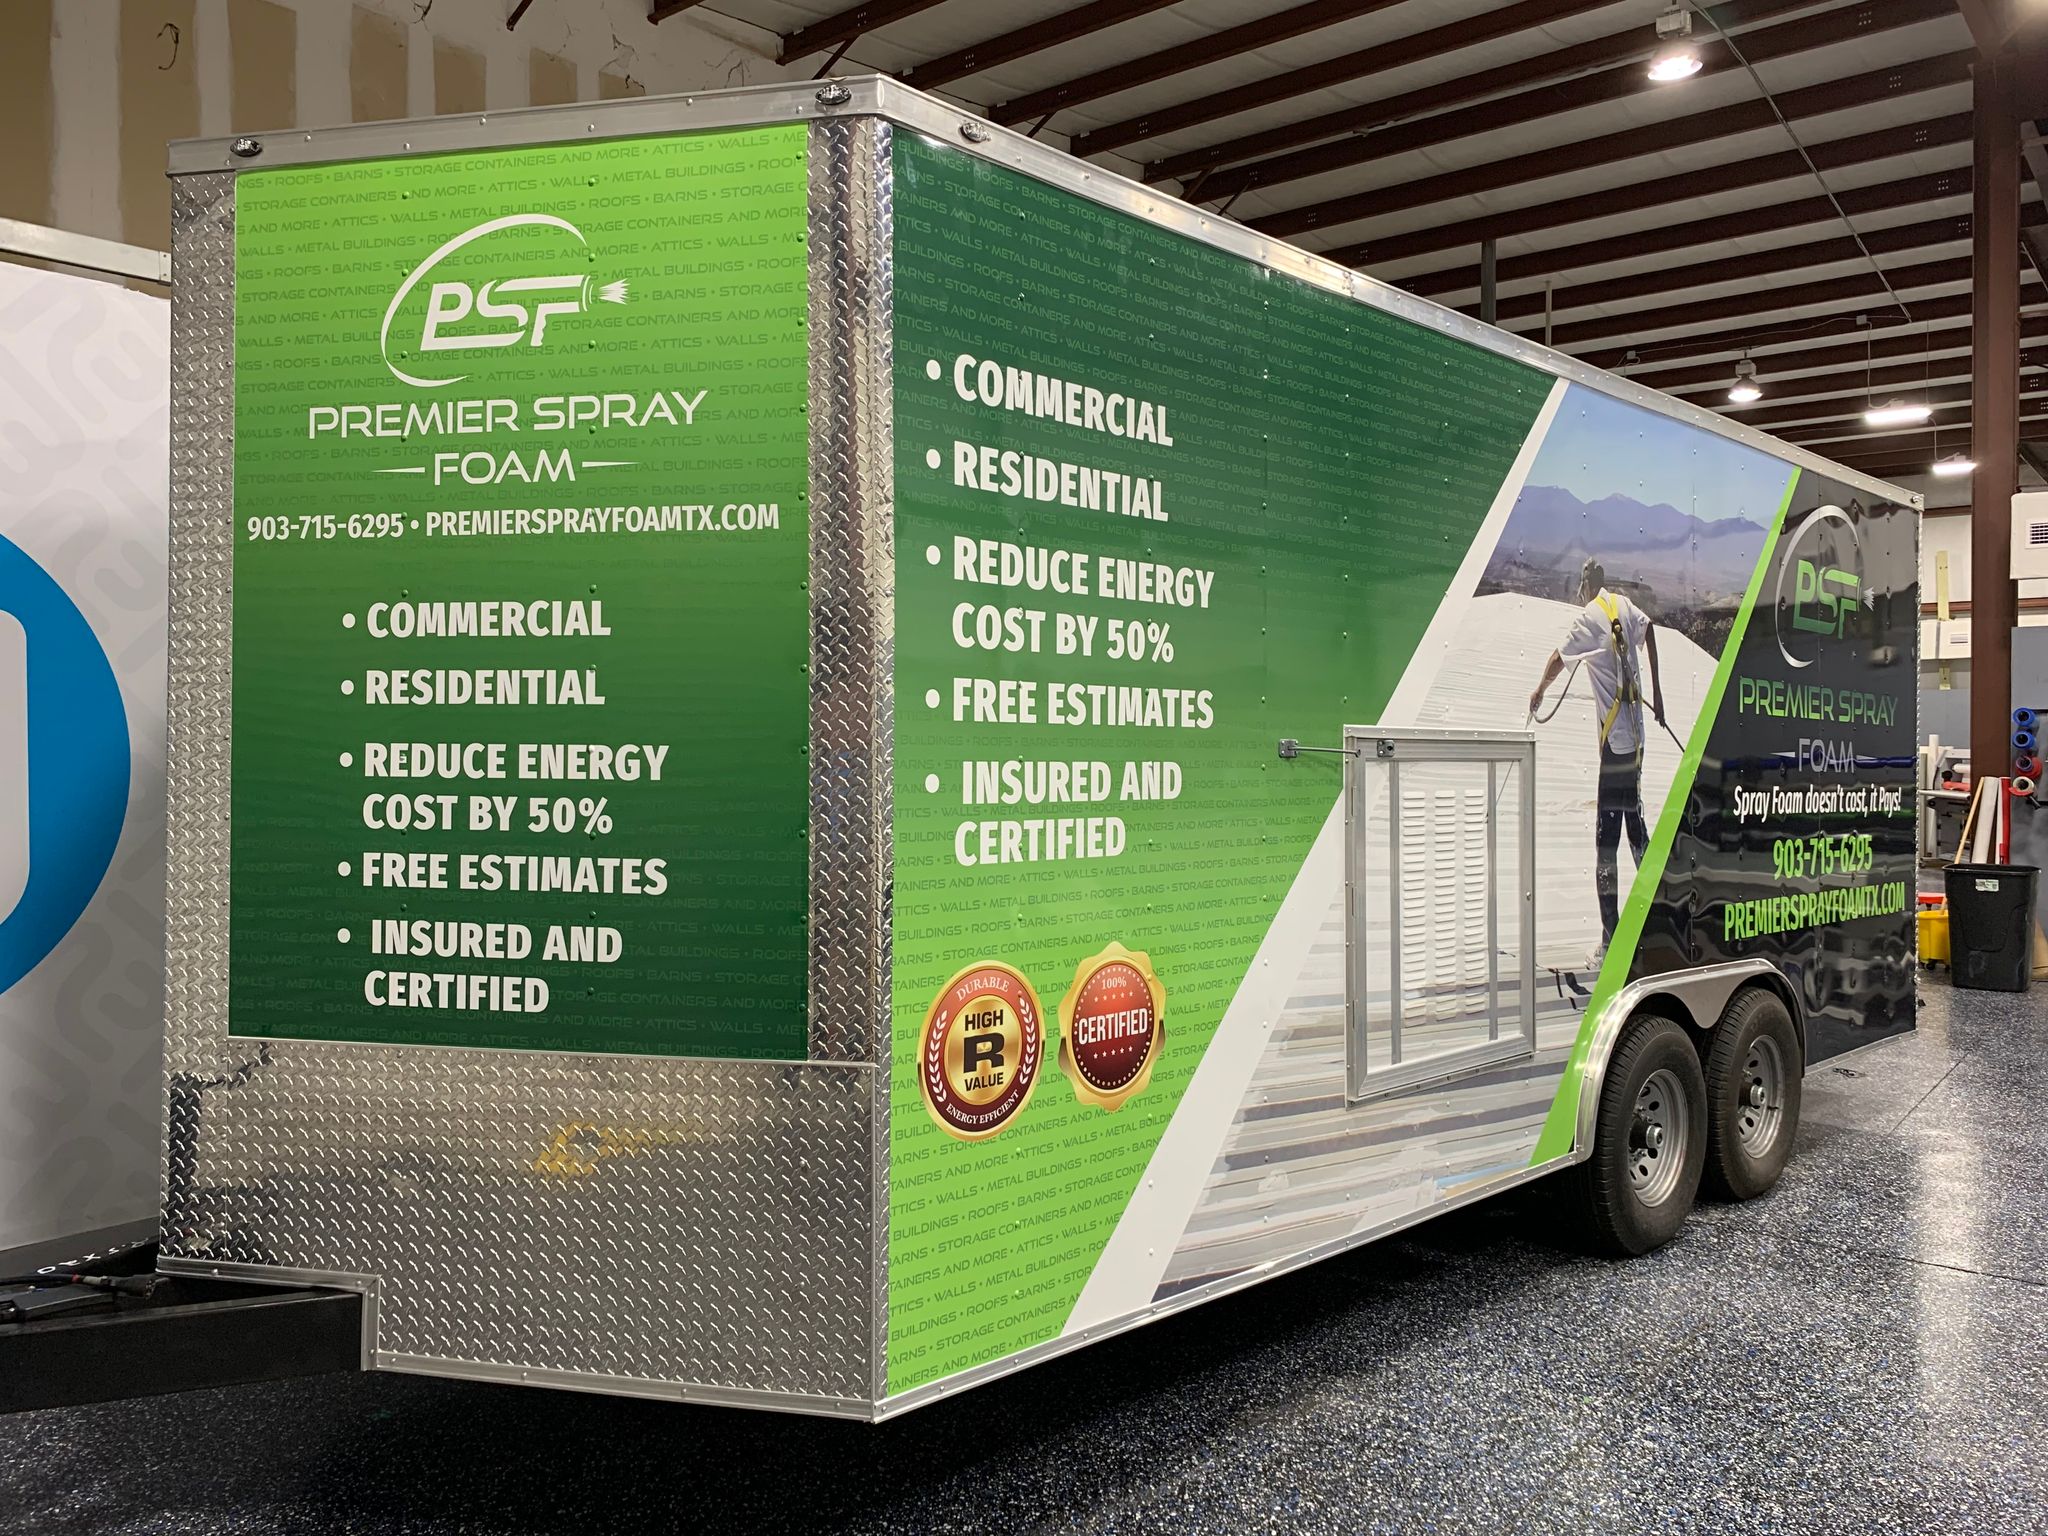 Large commercial two-wheel trailer, wrapped in a customized glossy green vinyl trailer wrap. Custom "Premier Spray Foam" commercial trailer wrap application, innovated by Jacksonville Florida's Wraps Direct.